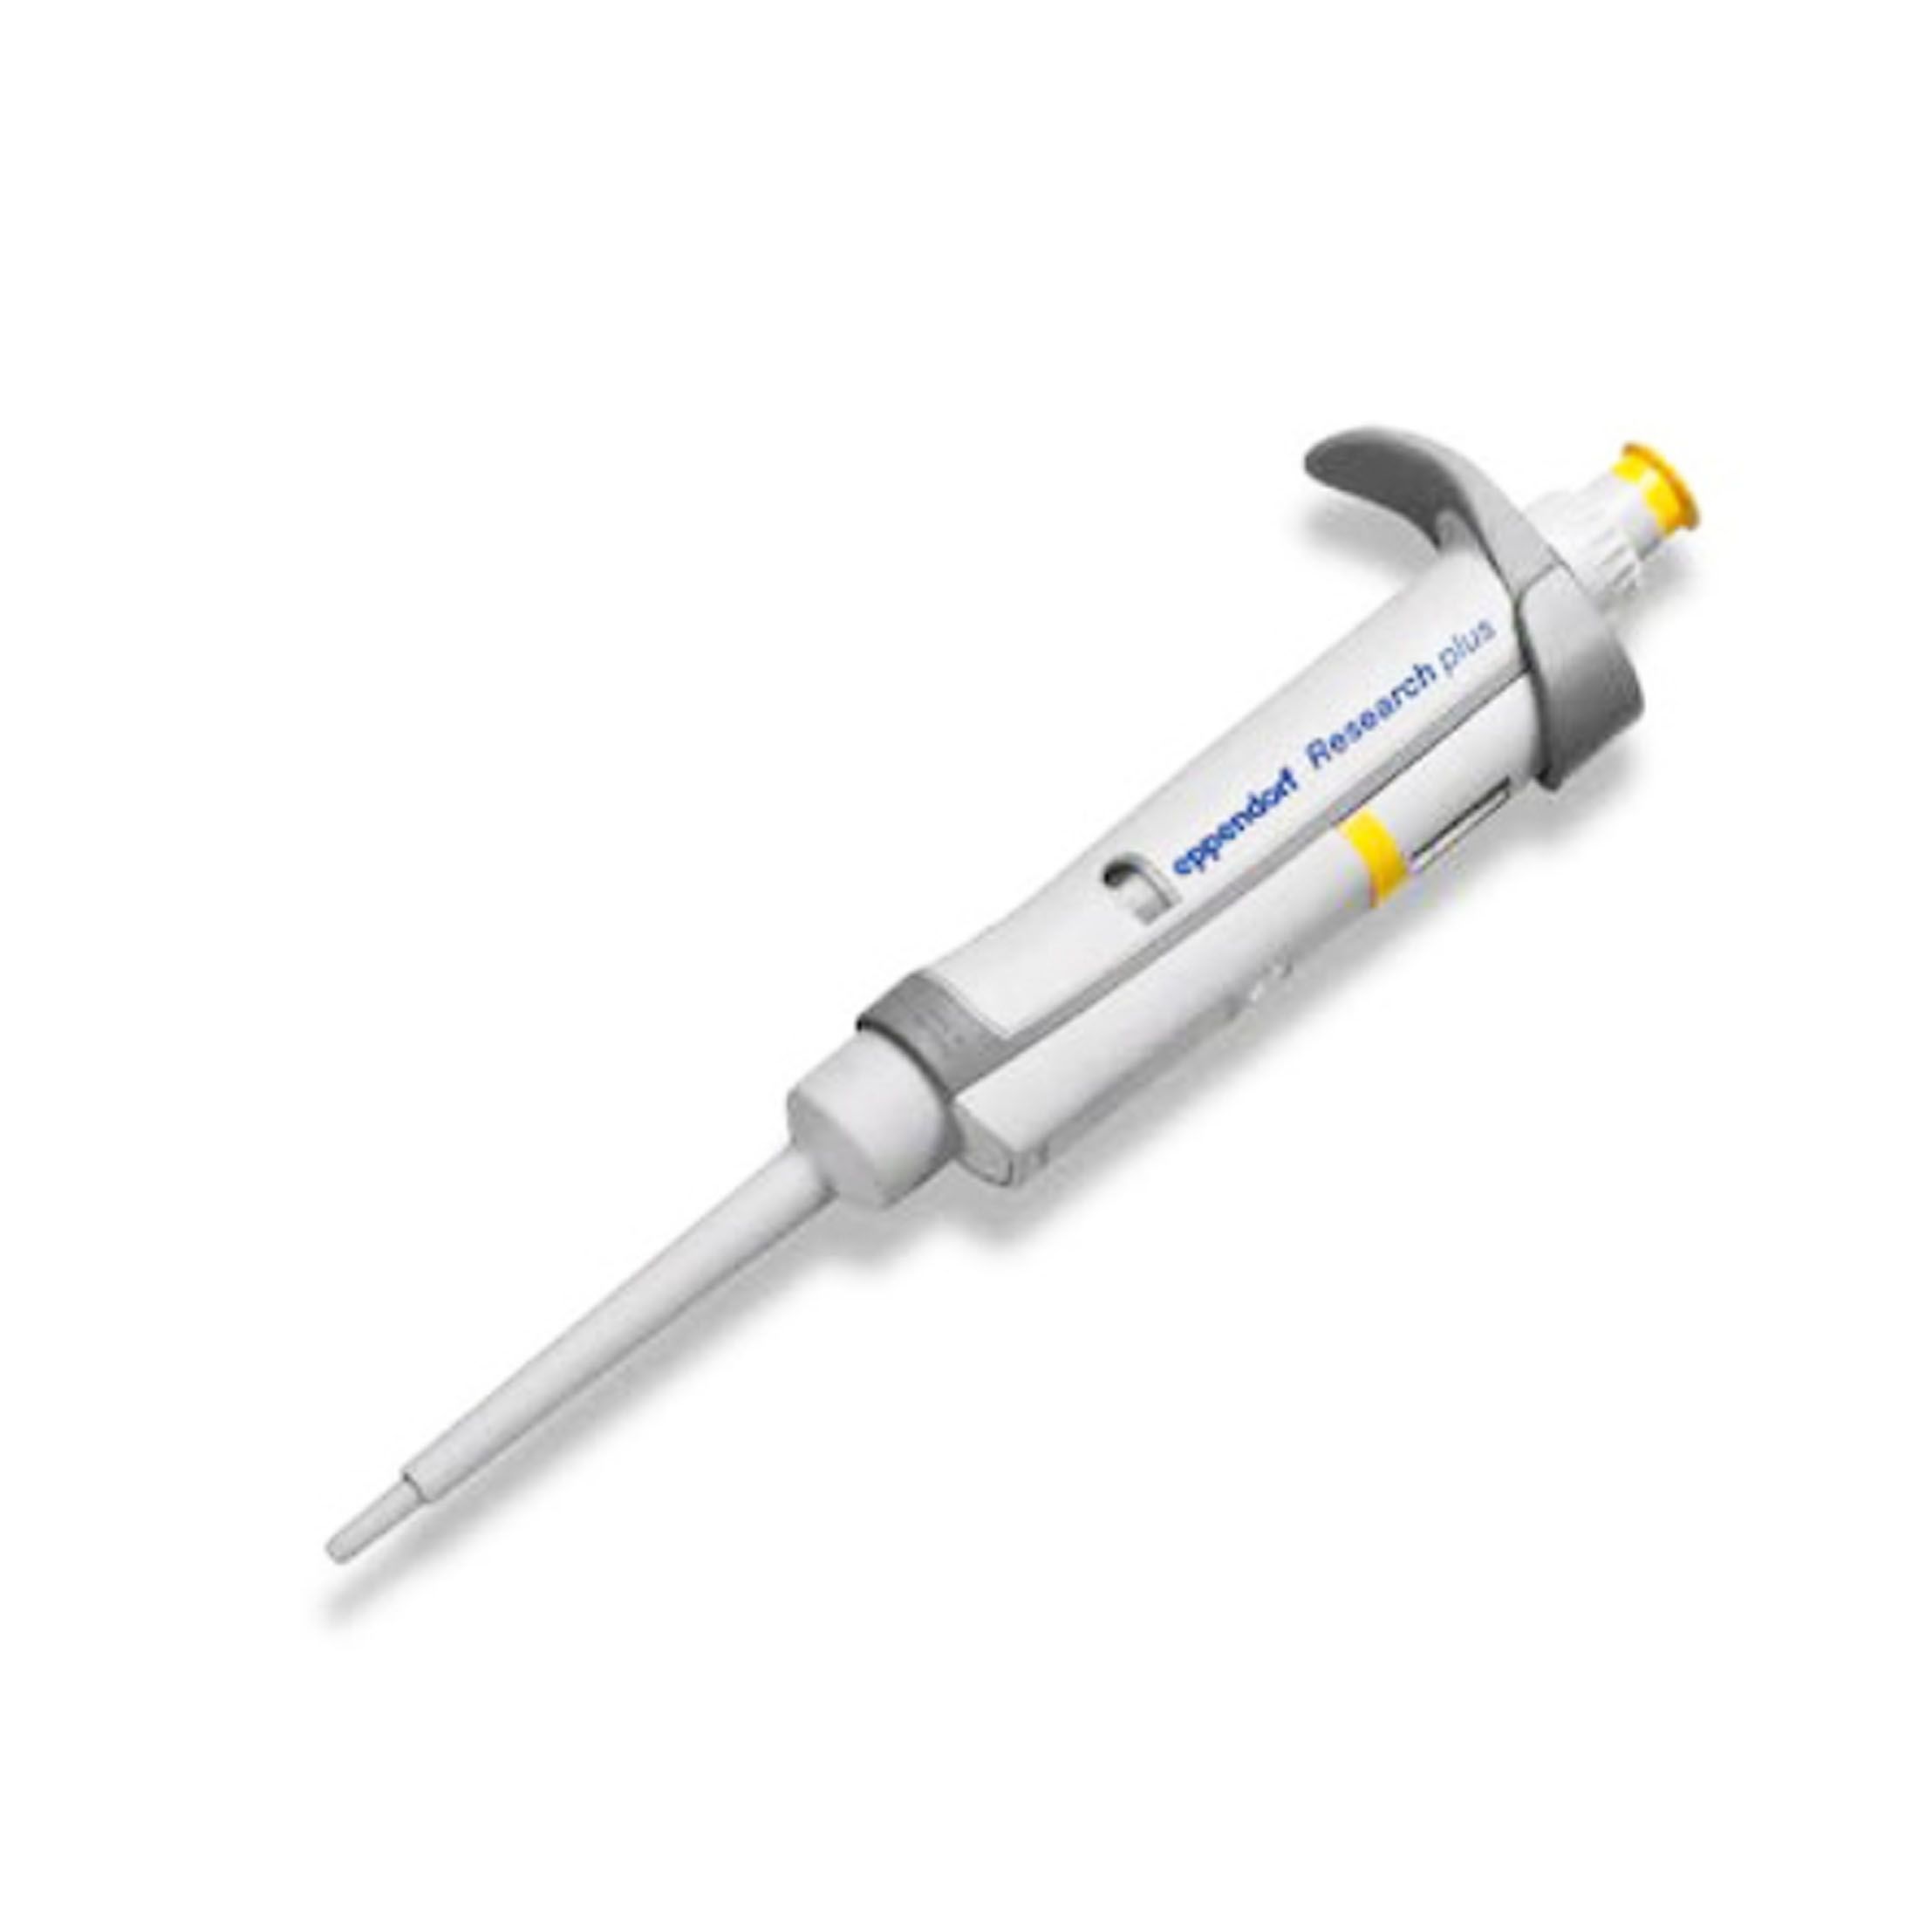 Eppendorf  3120000054  Single-channel adjustable range pipette, including suction head, 20-200 μ l